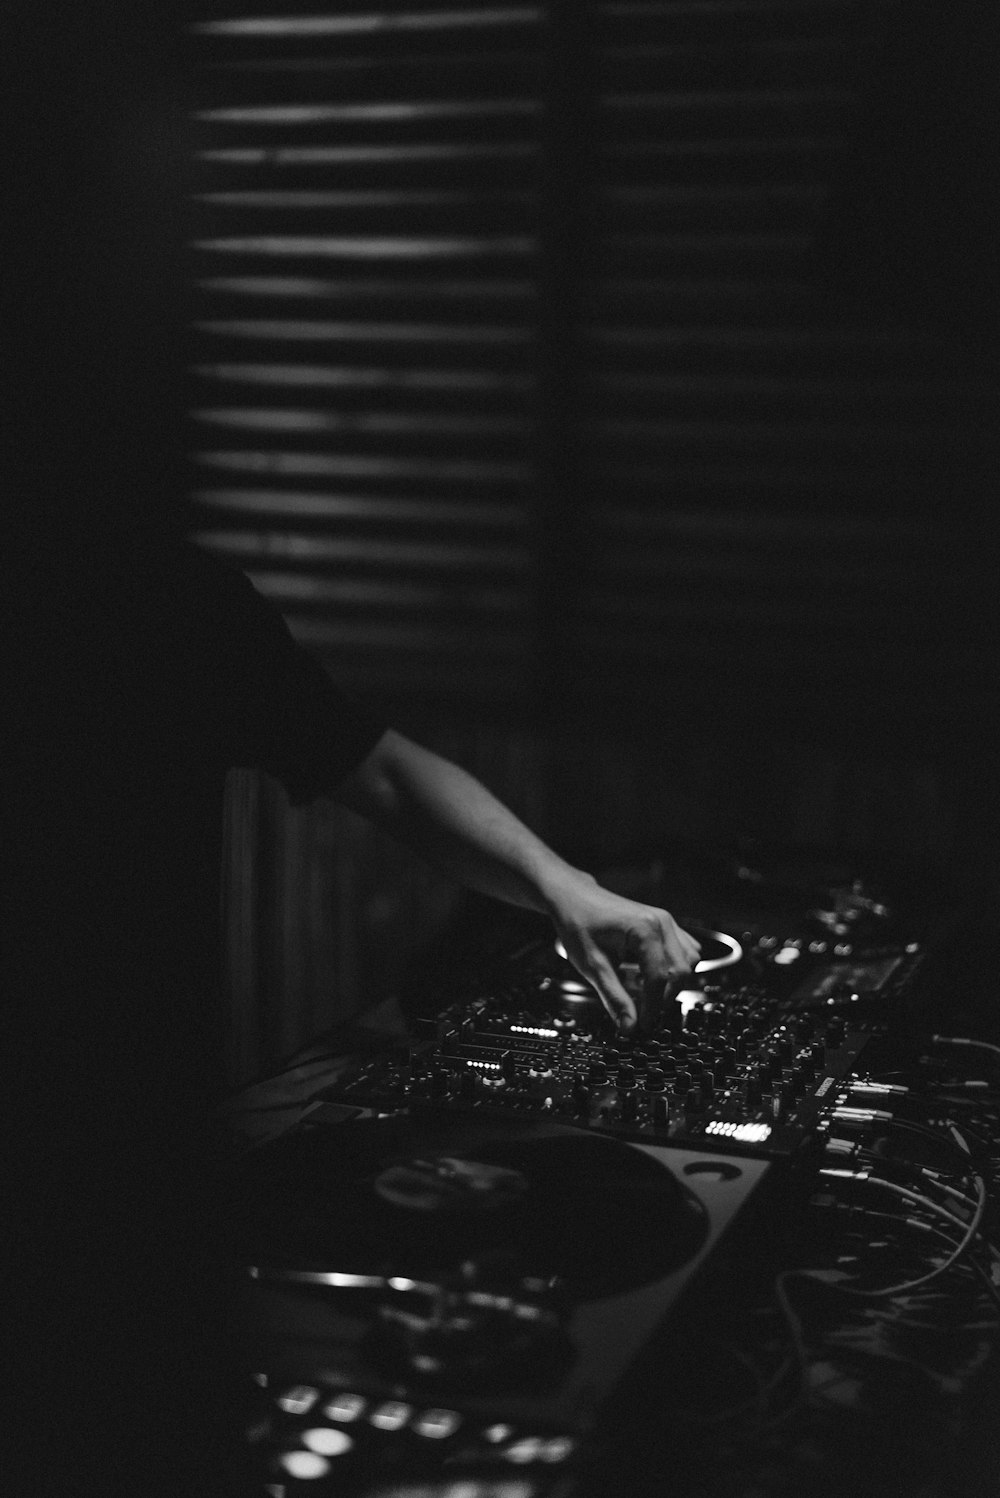 grayscale photo of person playing dj controller